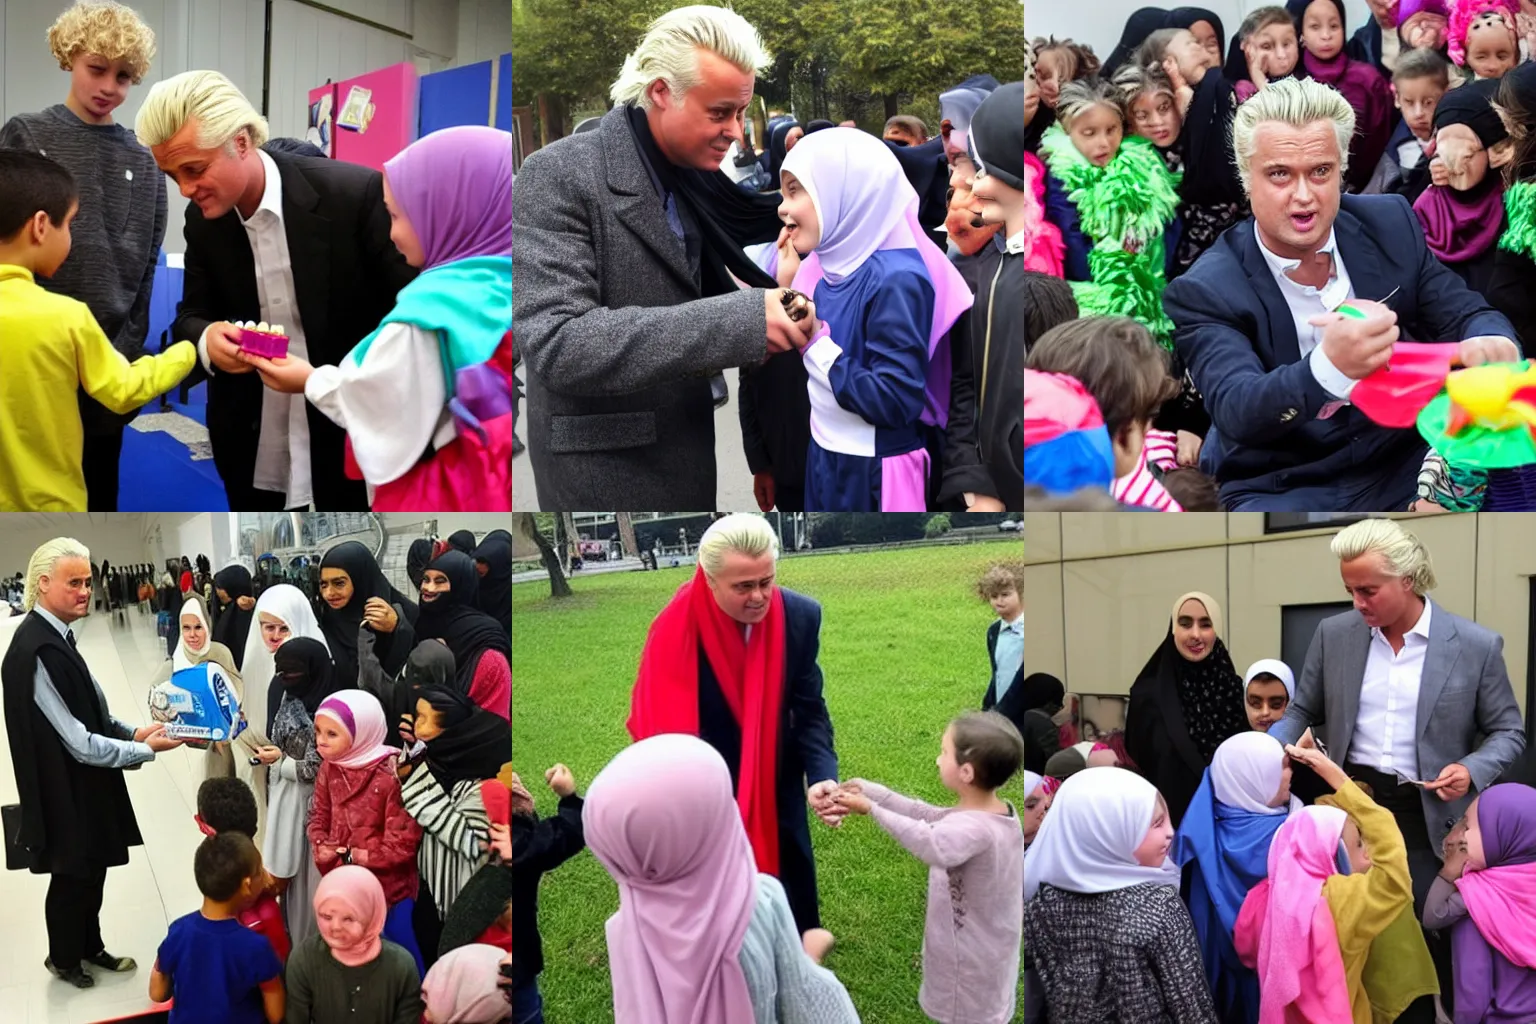 Prompt: geert wilders offering candy to lots of children wearing hijab